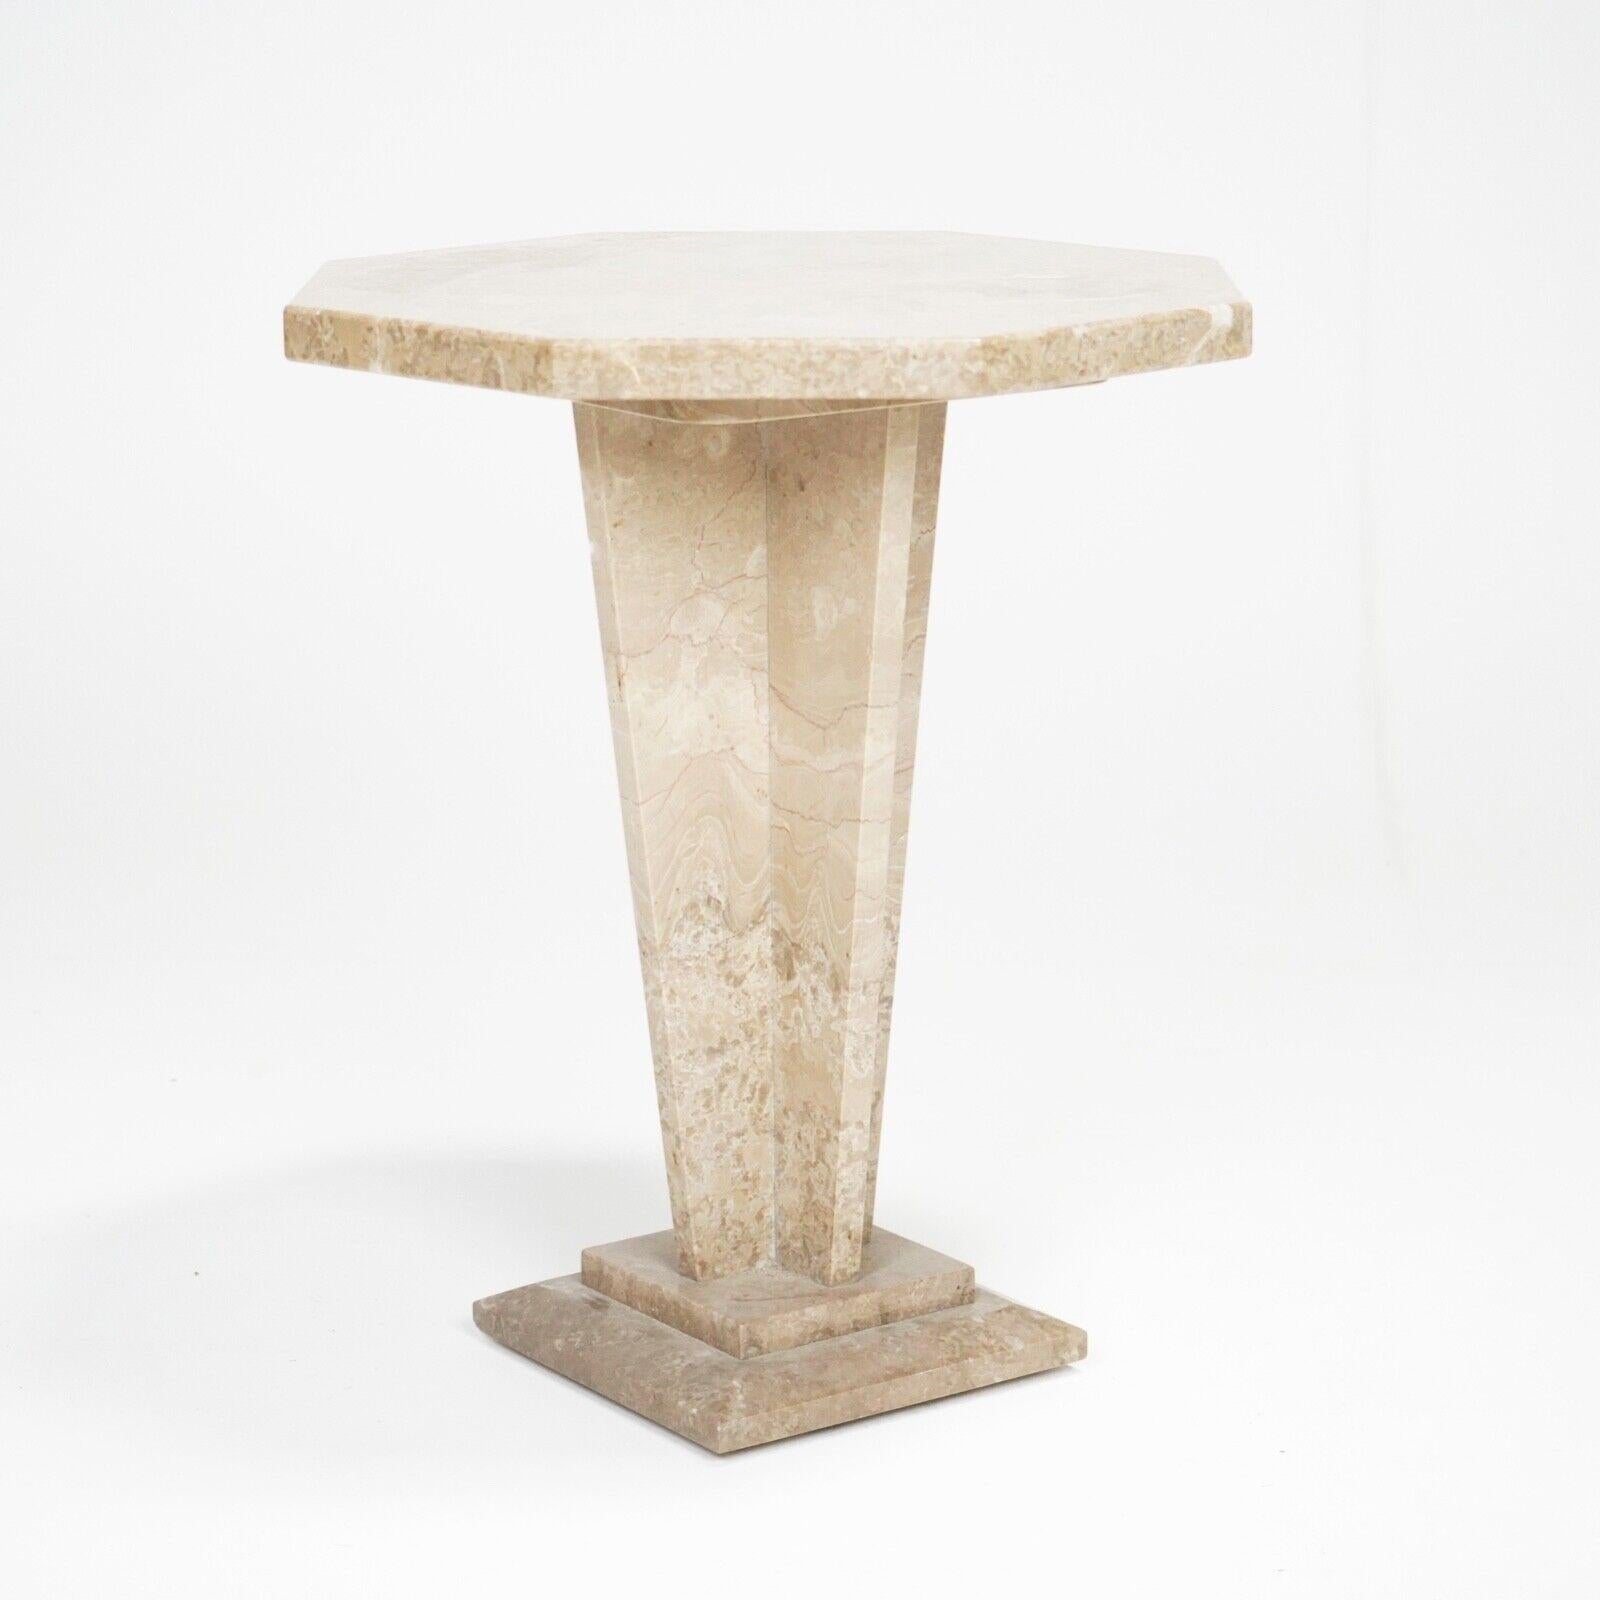 A French marble side table with octagonal top and cruciform stem on a stepped base. Made from marble, every side unique in its natural patterns. Condition is very good.

Condition 
Please do take a careful look at all our pictures and note that